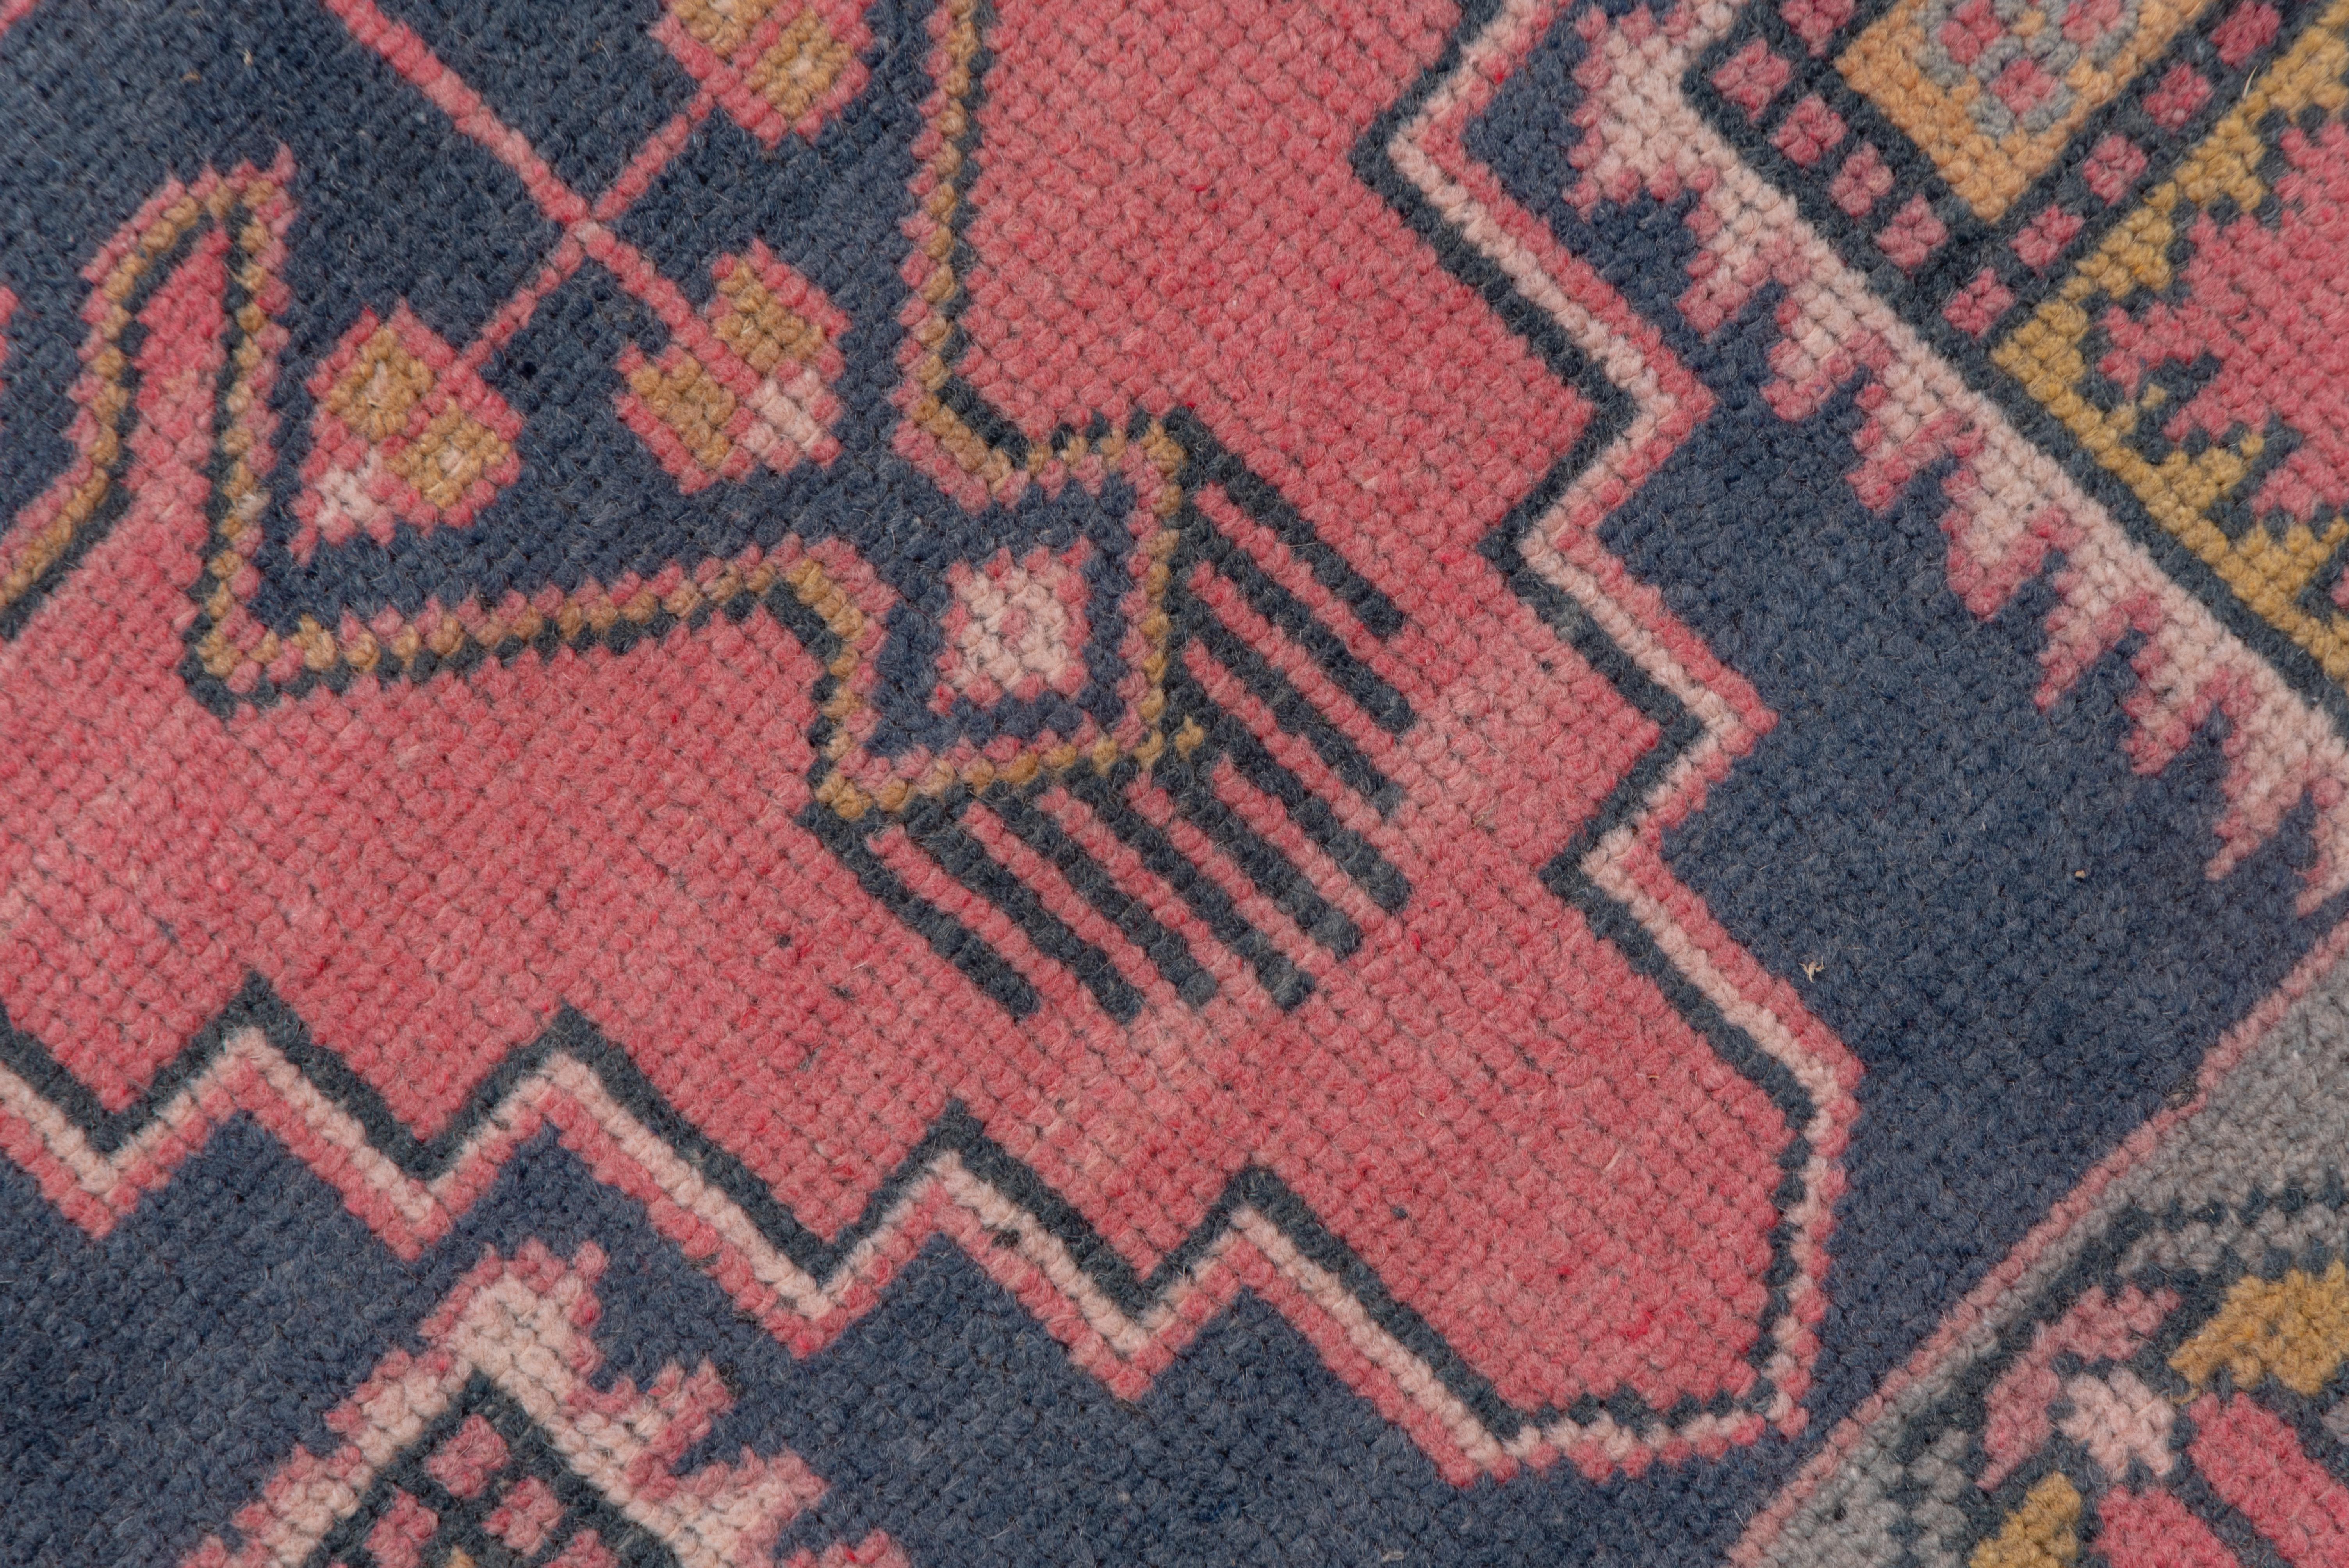 Hand-Knotted Colorful Oushak Rug, Pink and Navy Tones